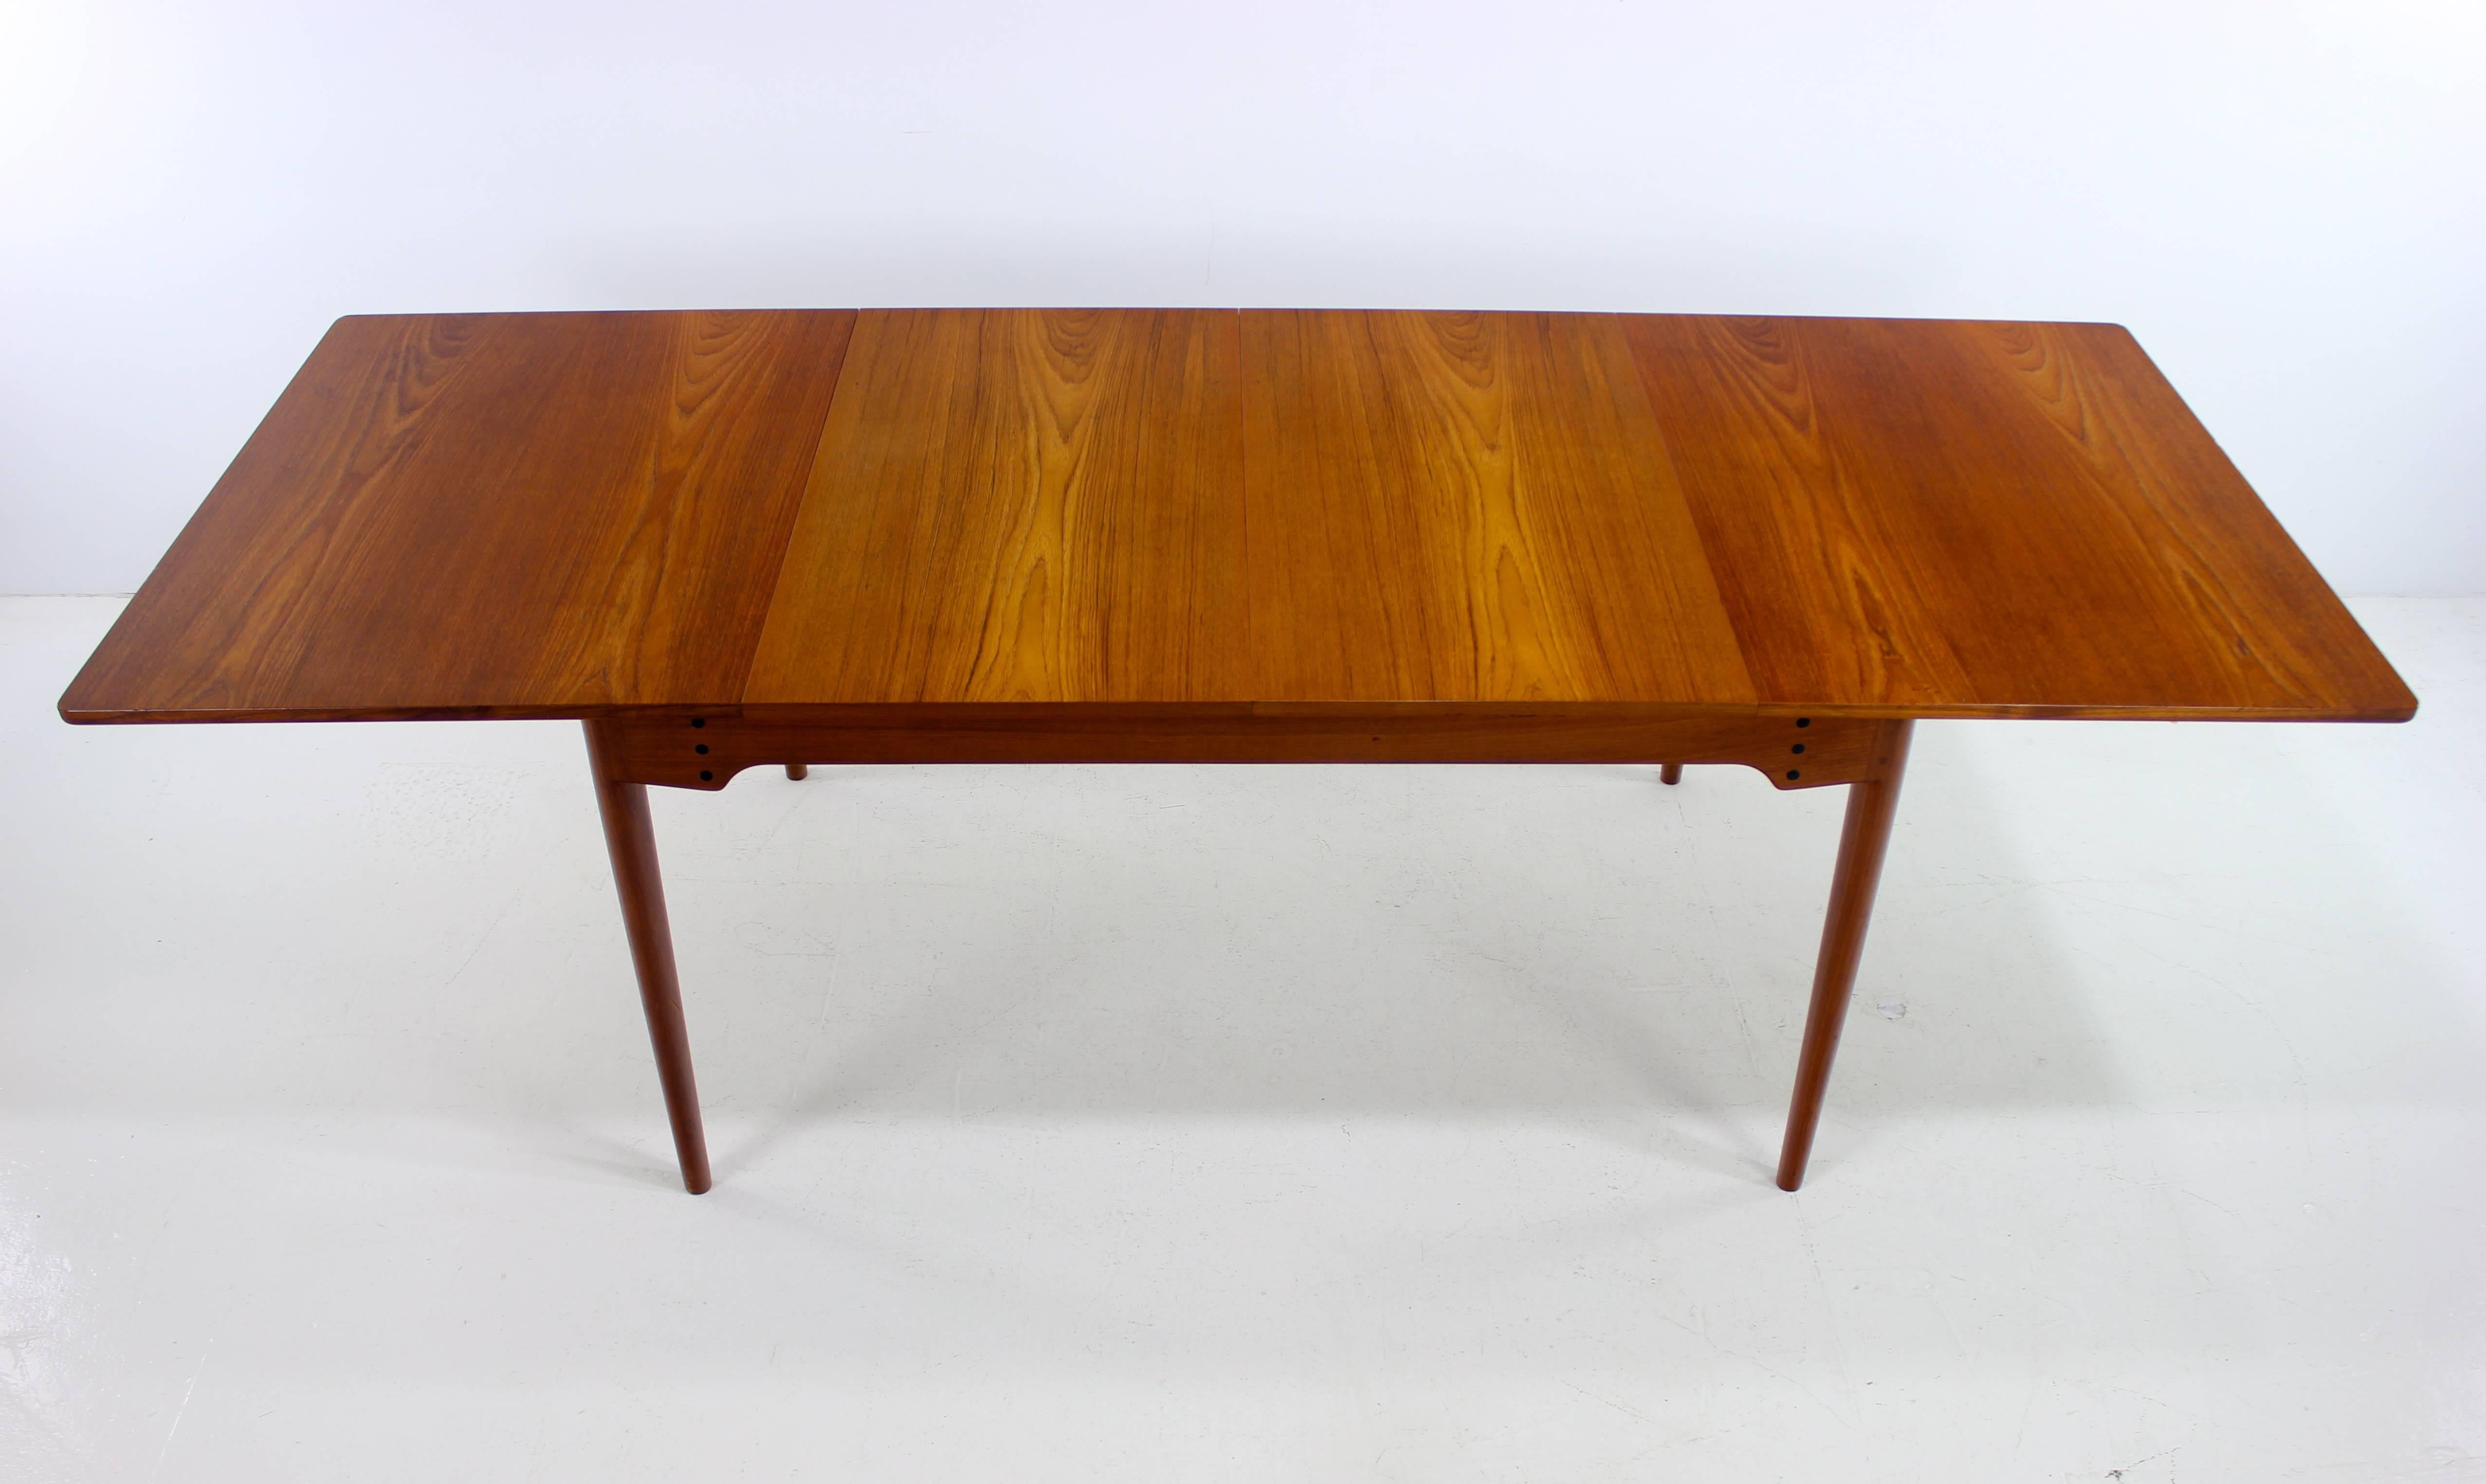 Danish modern dining table designed by Finn Juhl.
Bovirke, maker, model # B065.
Richly grained teak with pure Scandinavian elegance and style.
Two leaves measure 19.75" providing a full extension of 94.75".
Matchless quality and